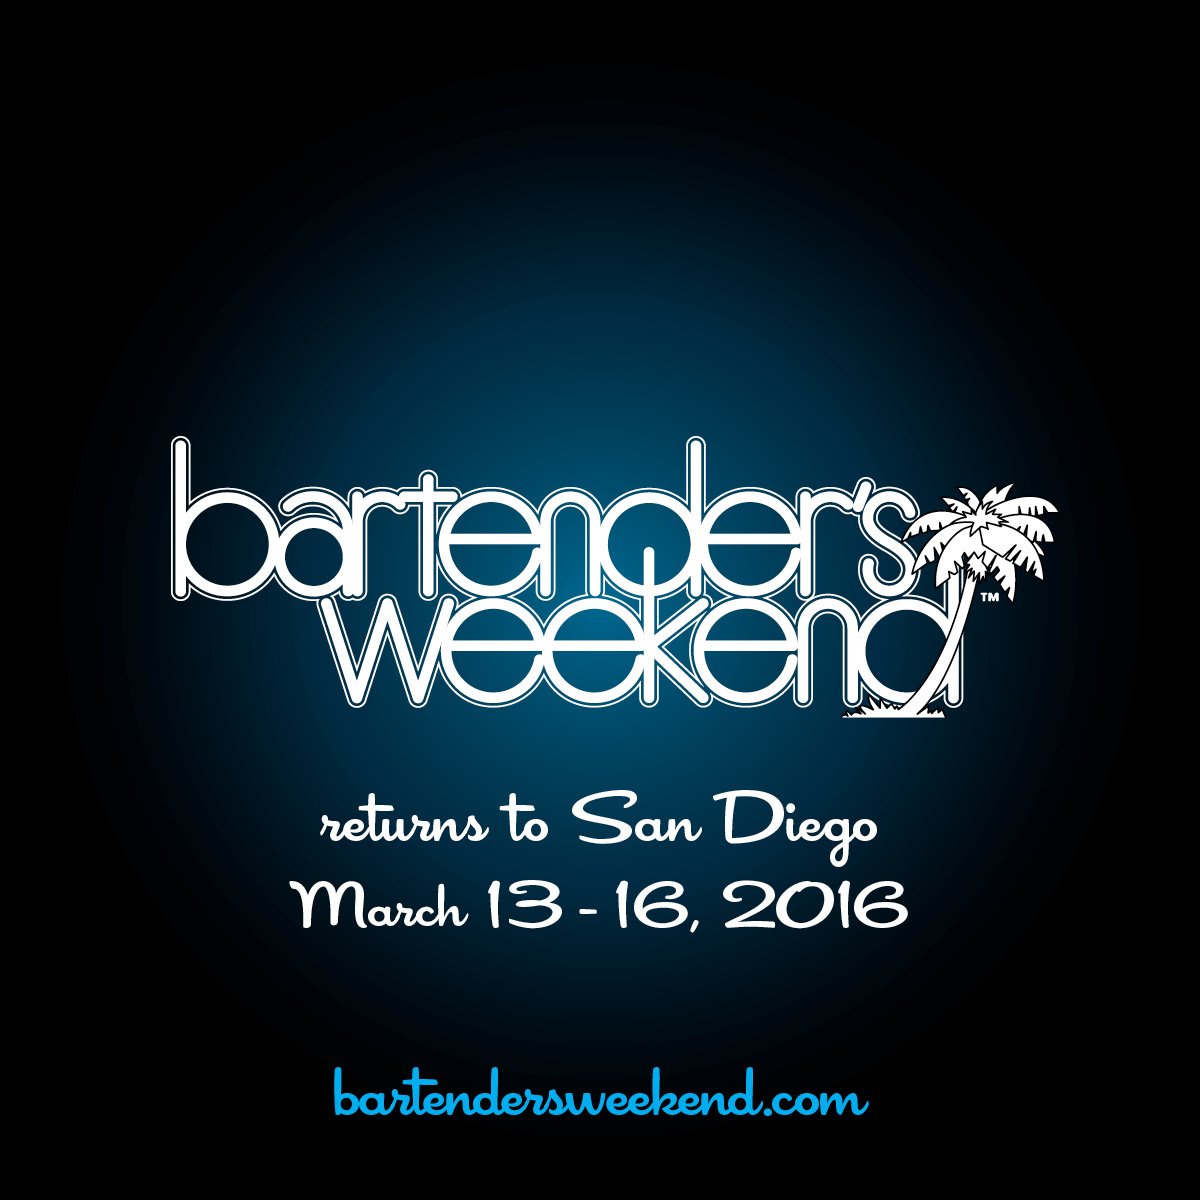 Bartender's Weekend returns to #sandiego 3/16 - 3/19. Watch bartendersweekend.com for our events listing!